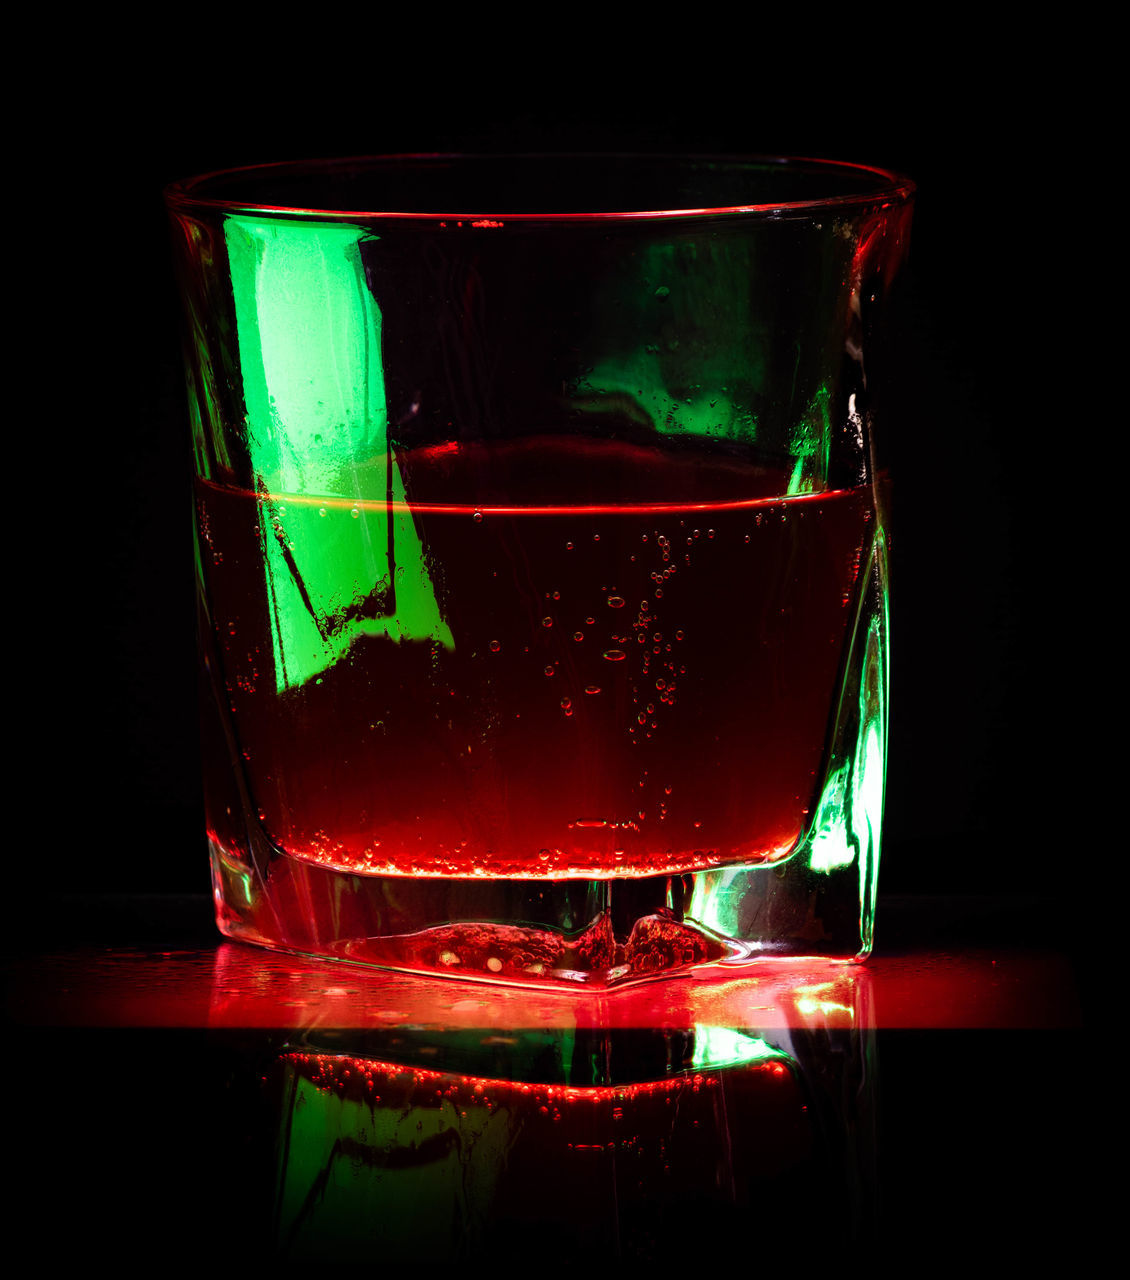 CLOSE-UP OF DRINK IN GLASS